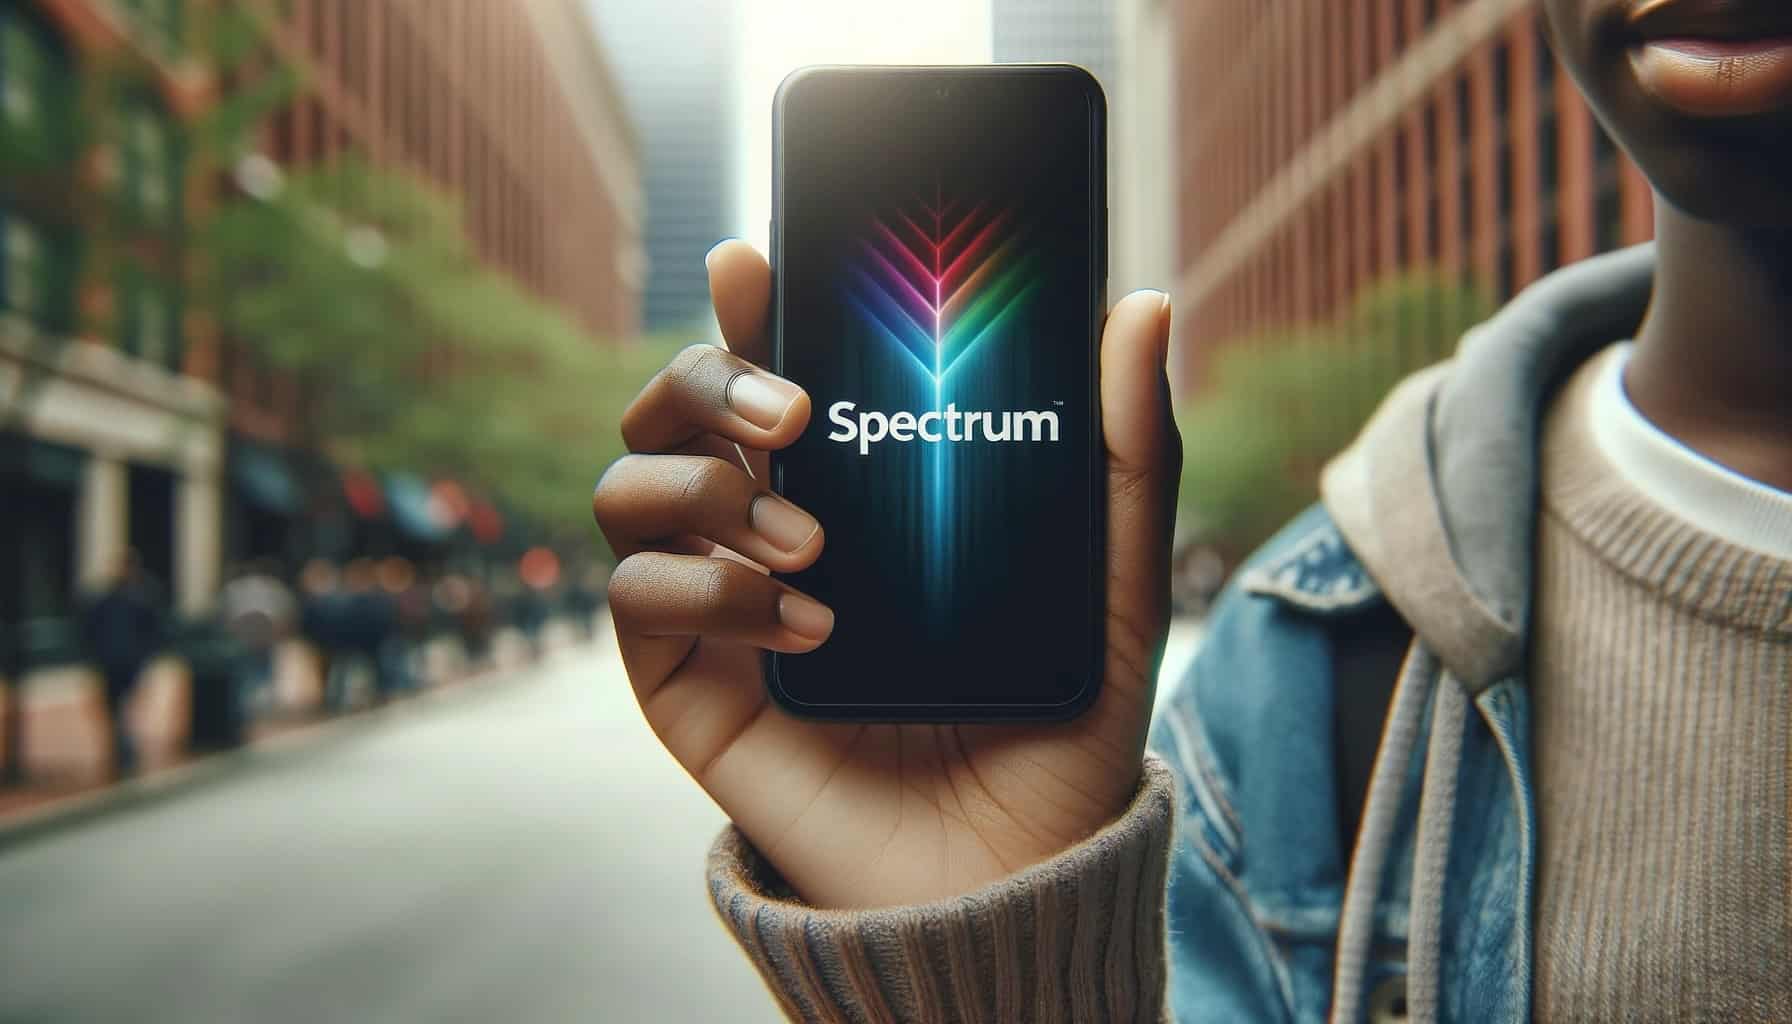 Hand holding a smartphone displaying the Spectrum Mobile logo on the screen